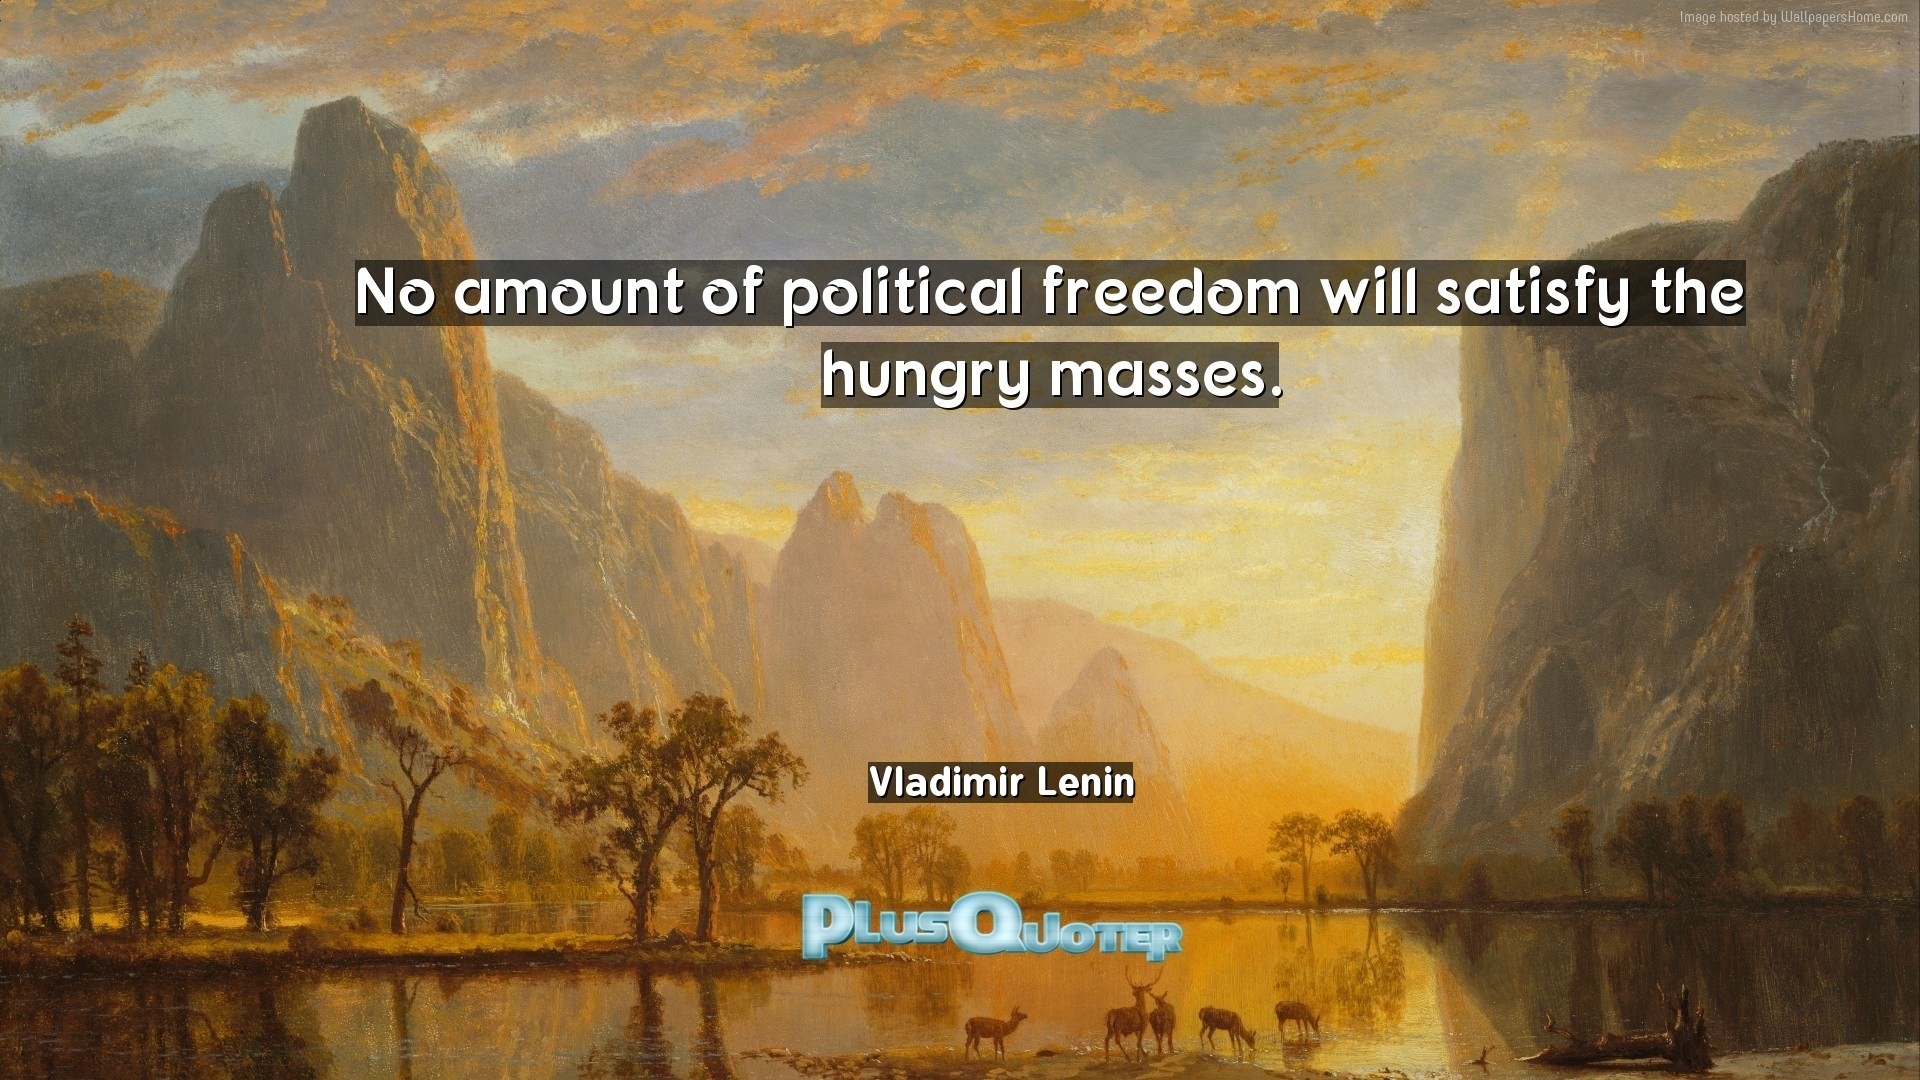 1920x1080 Download Wallpaper with inspirational Quotes- "No amount of political  freedom will satisfy the hungry